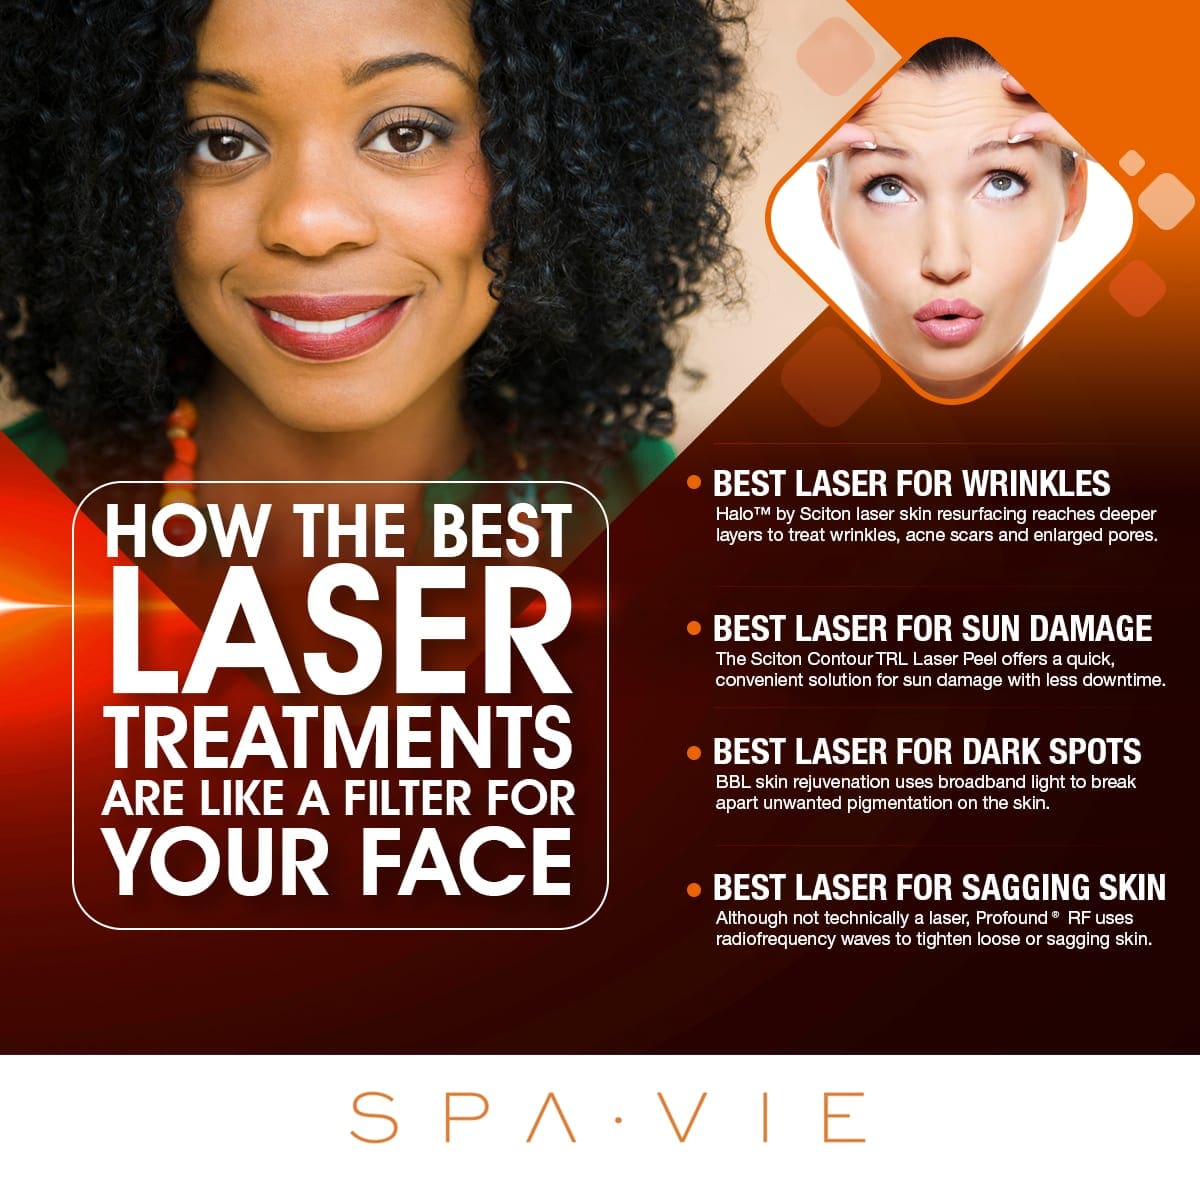 How The Best Laser Treatments Are Like A Filter For Your Face [Infographic]